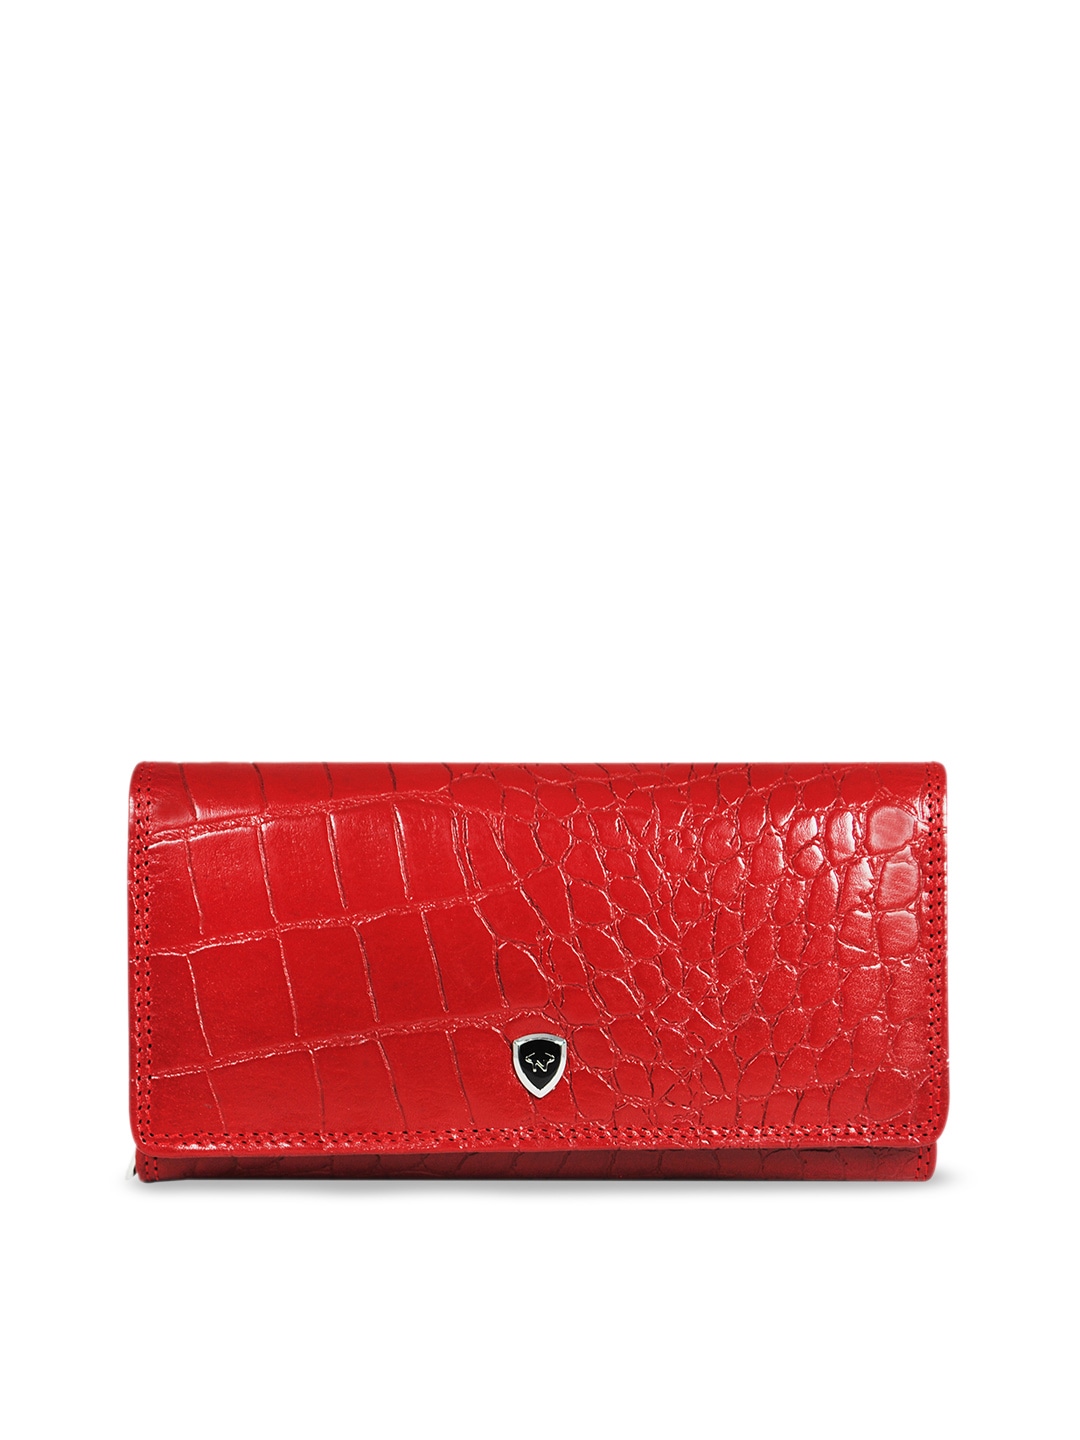 CALFNERO Women Red Genuine Leather Two Fold Wallet Price in India